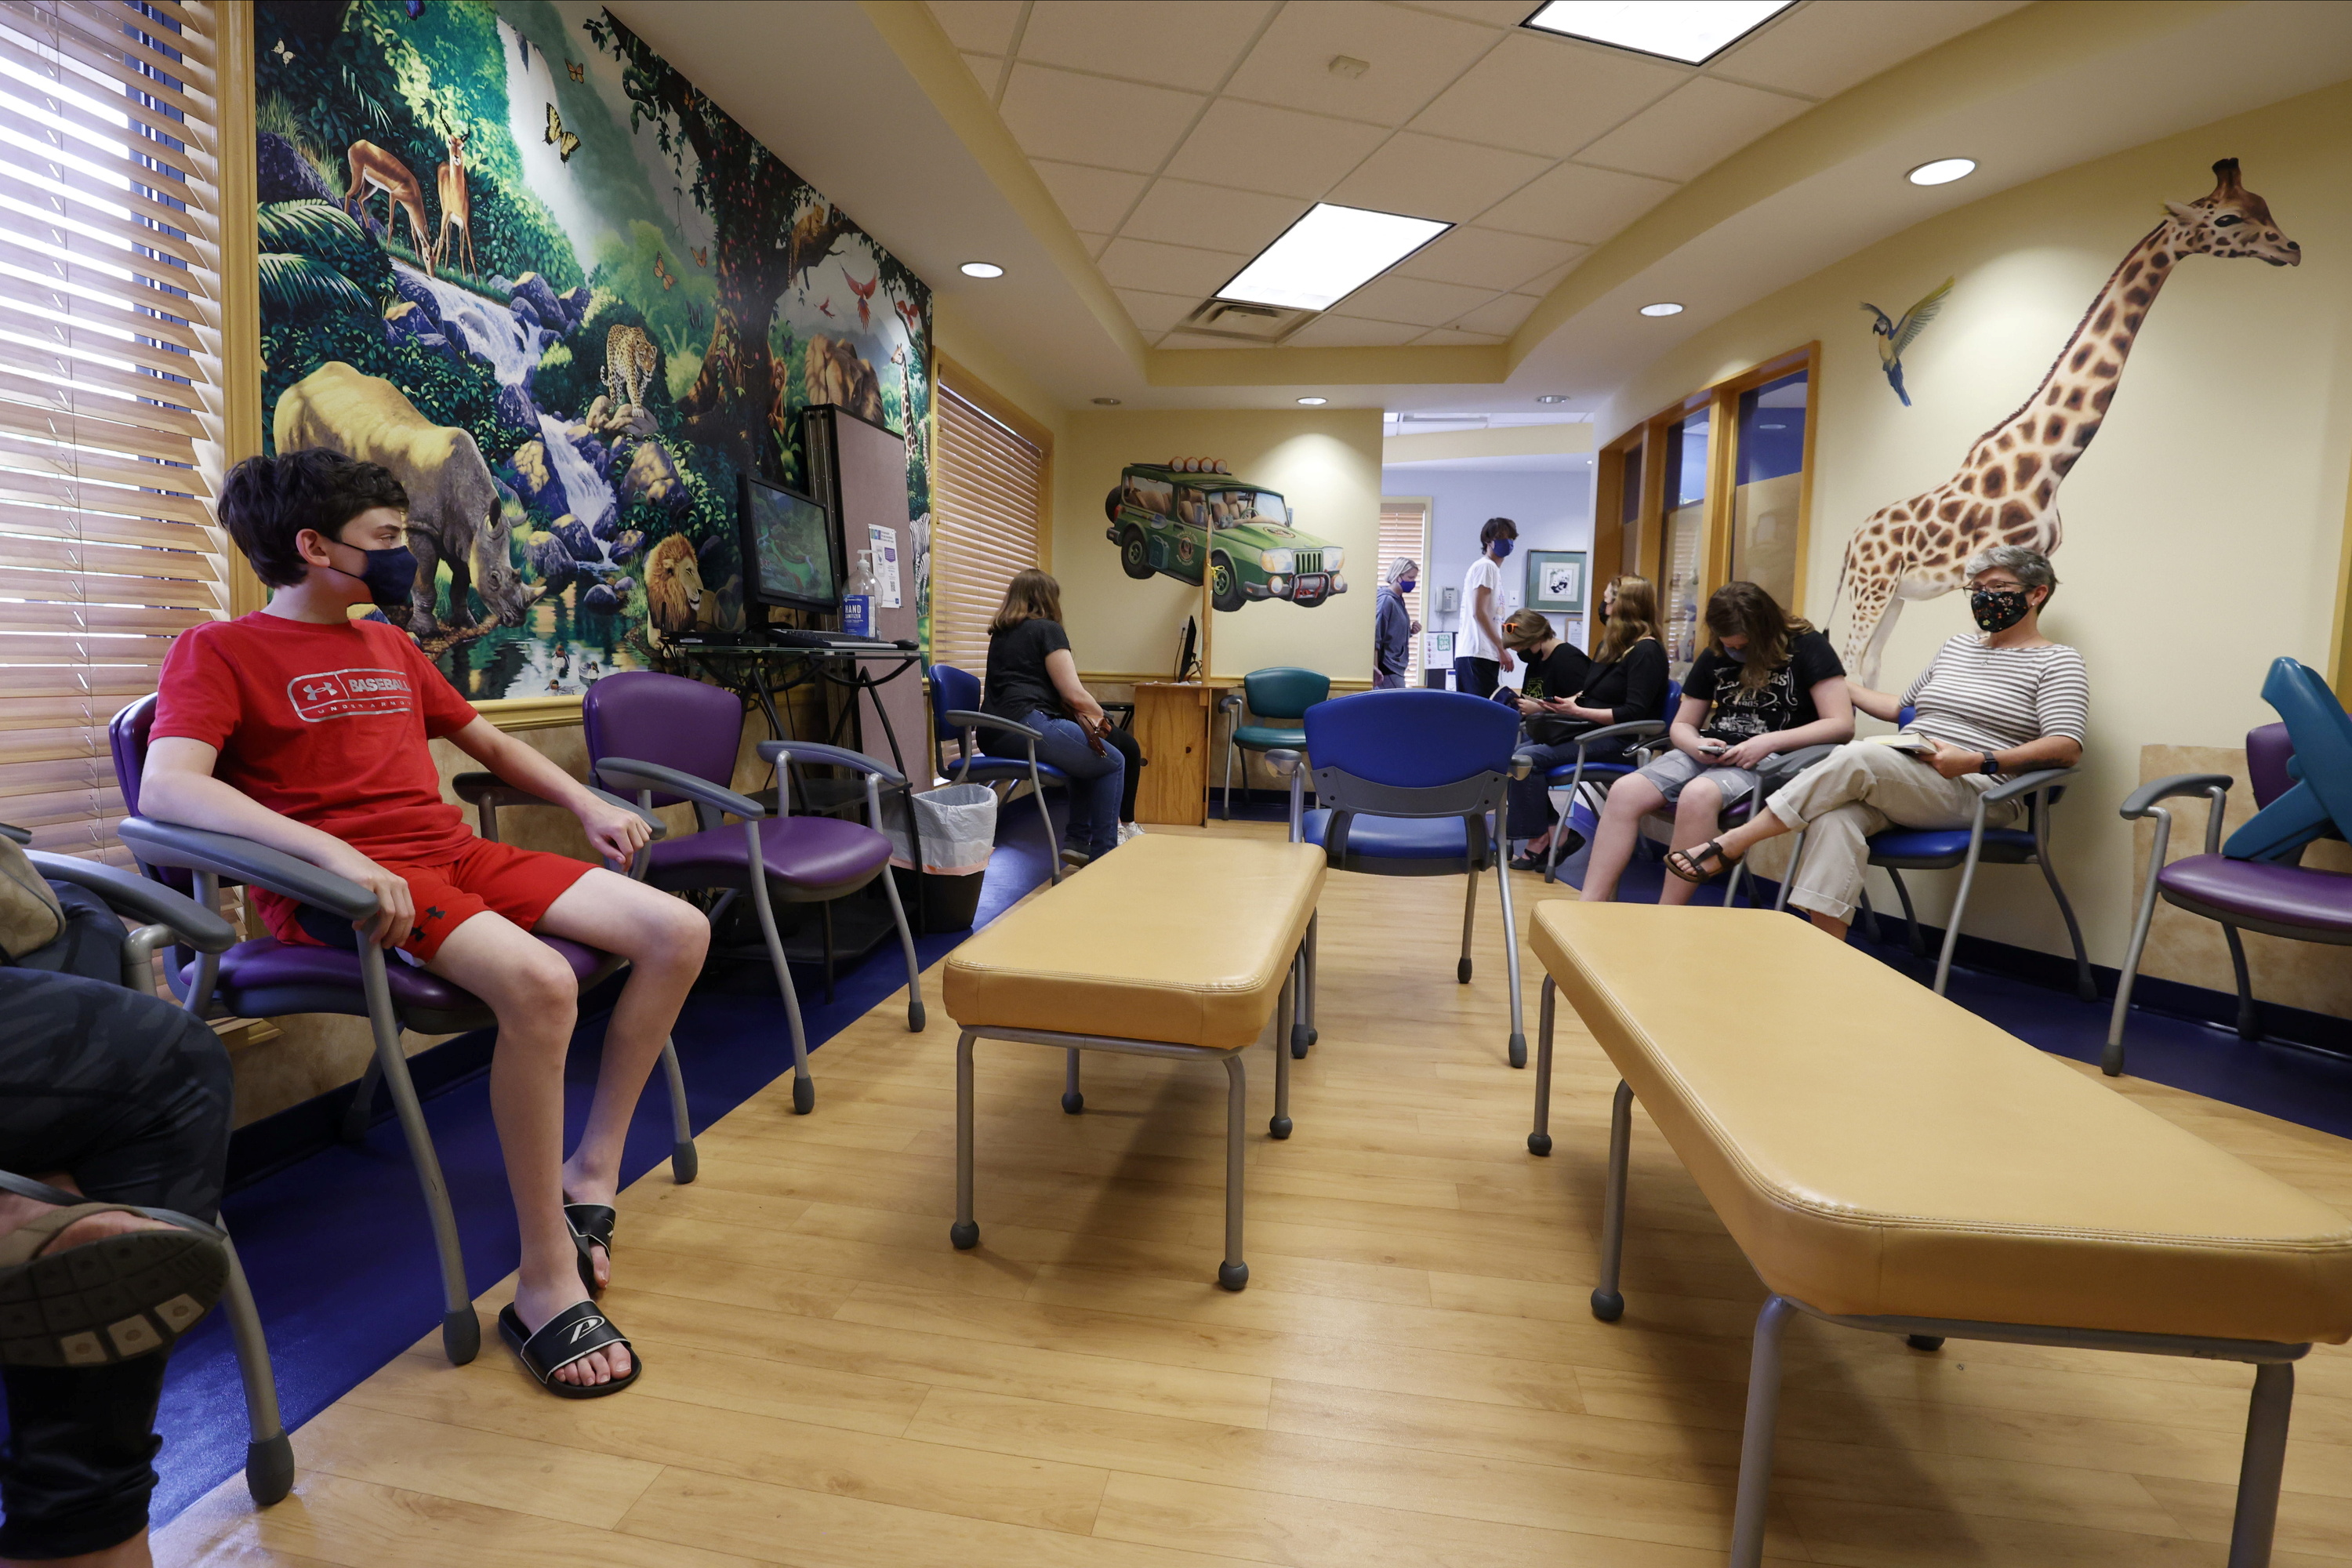 Aidan Mohl, 13,  joins others in a waiting room after receiving Pfizer's vaccine against coronavirus disease (COVID-19), after Georgia authorized the vaccine for ages over 12 years, at Dekalb Pediatric Center in Decatur